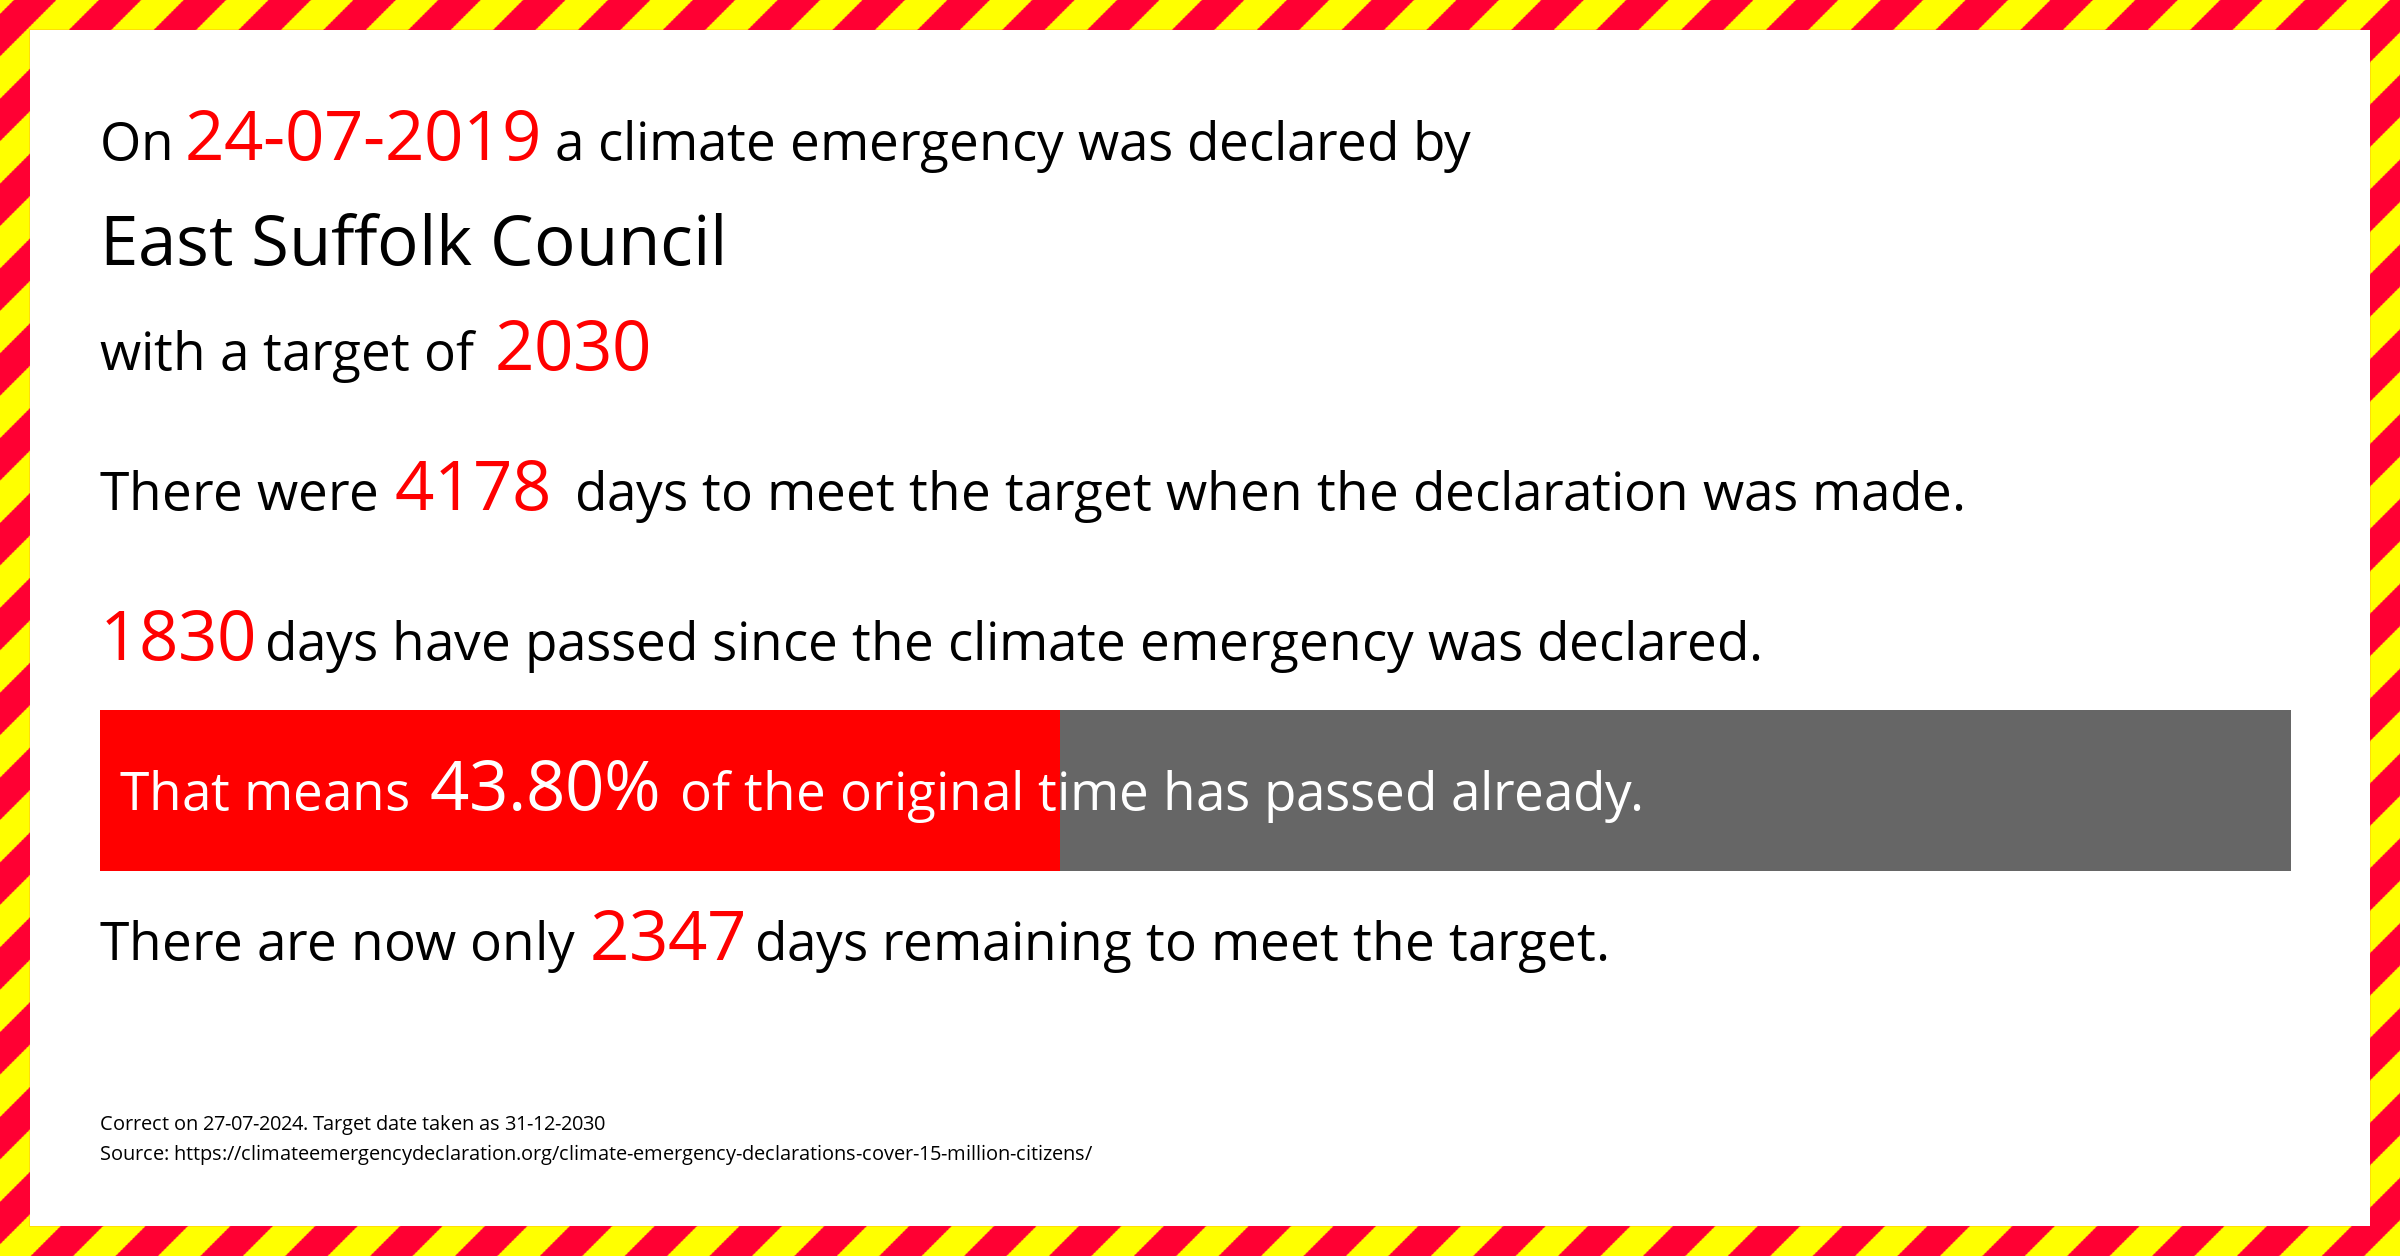 East Suffolk Council declared a Climate emergency on Wednesday 24th July 2019, with a target of 2030.